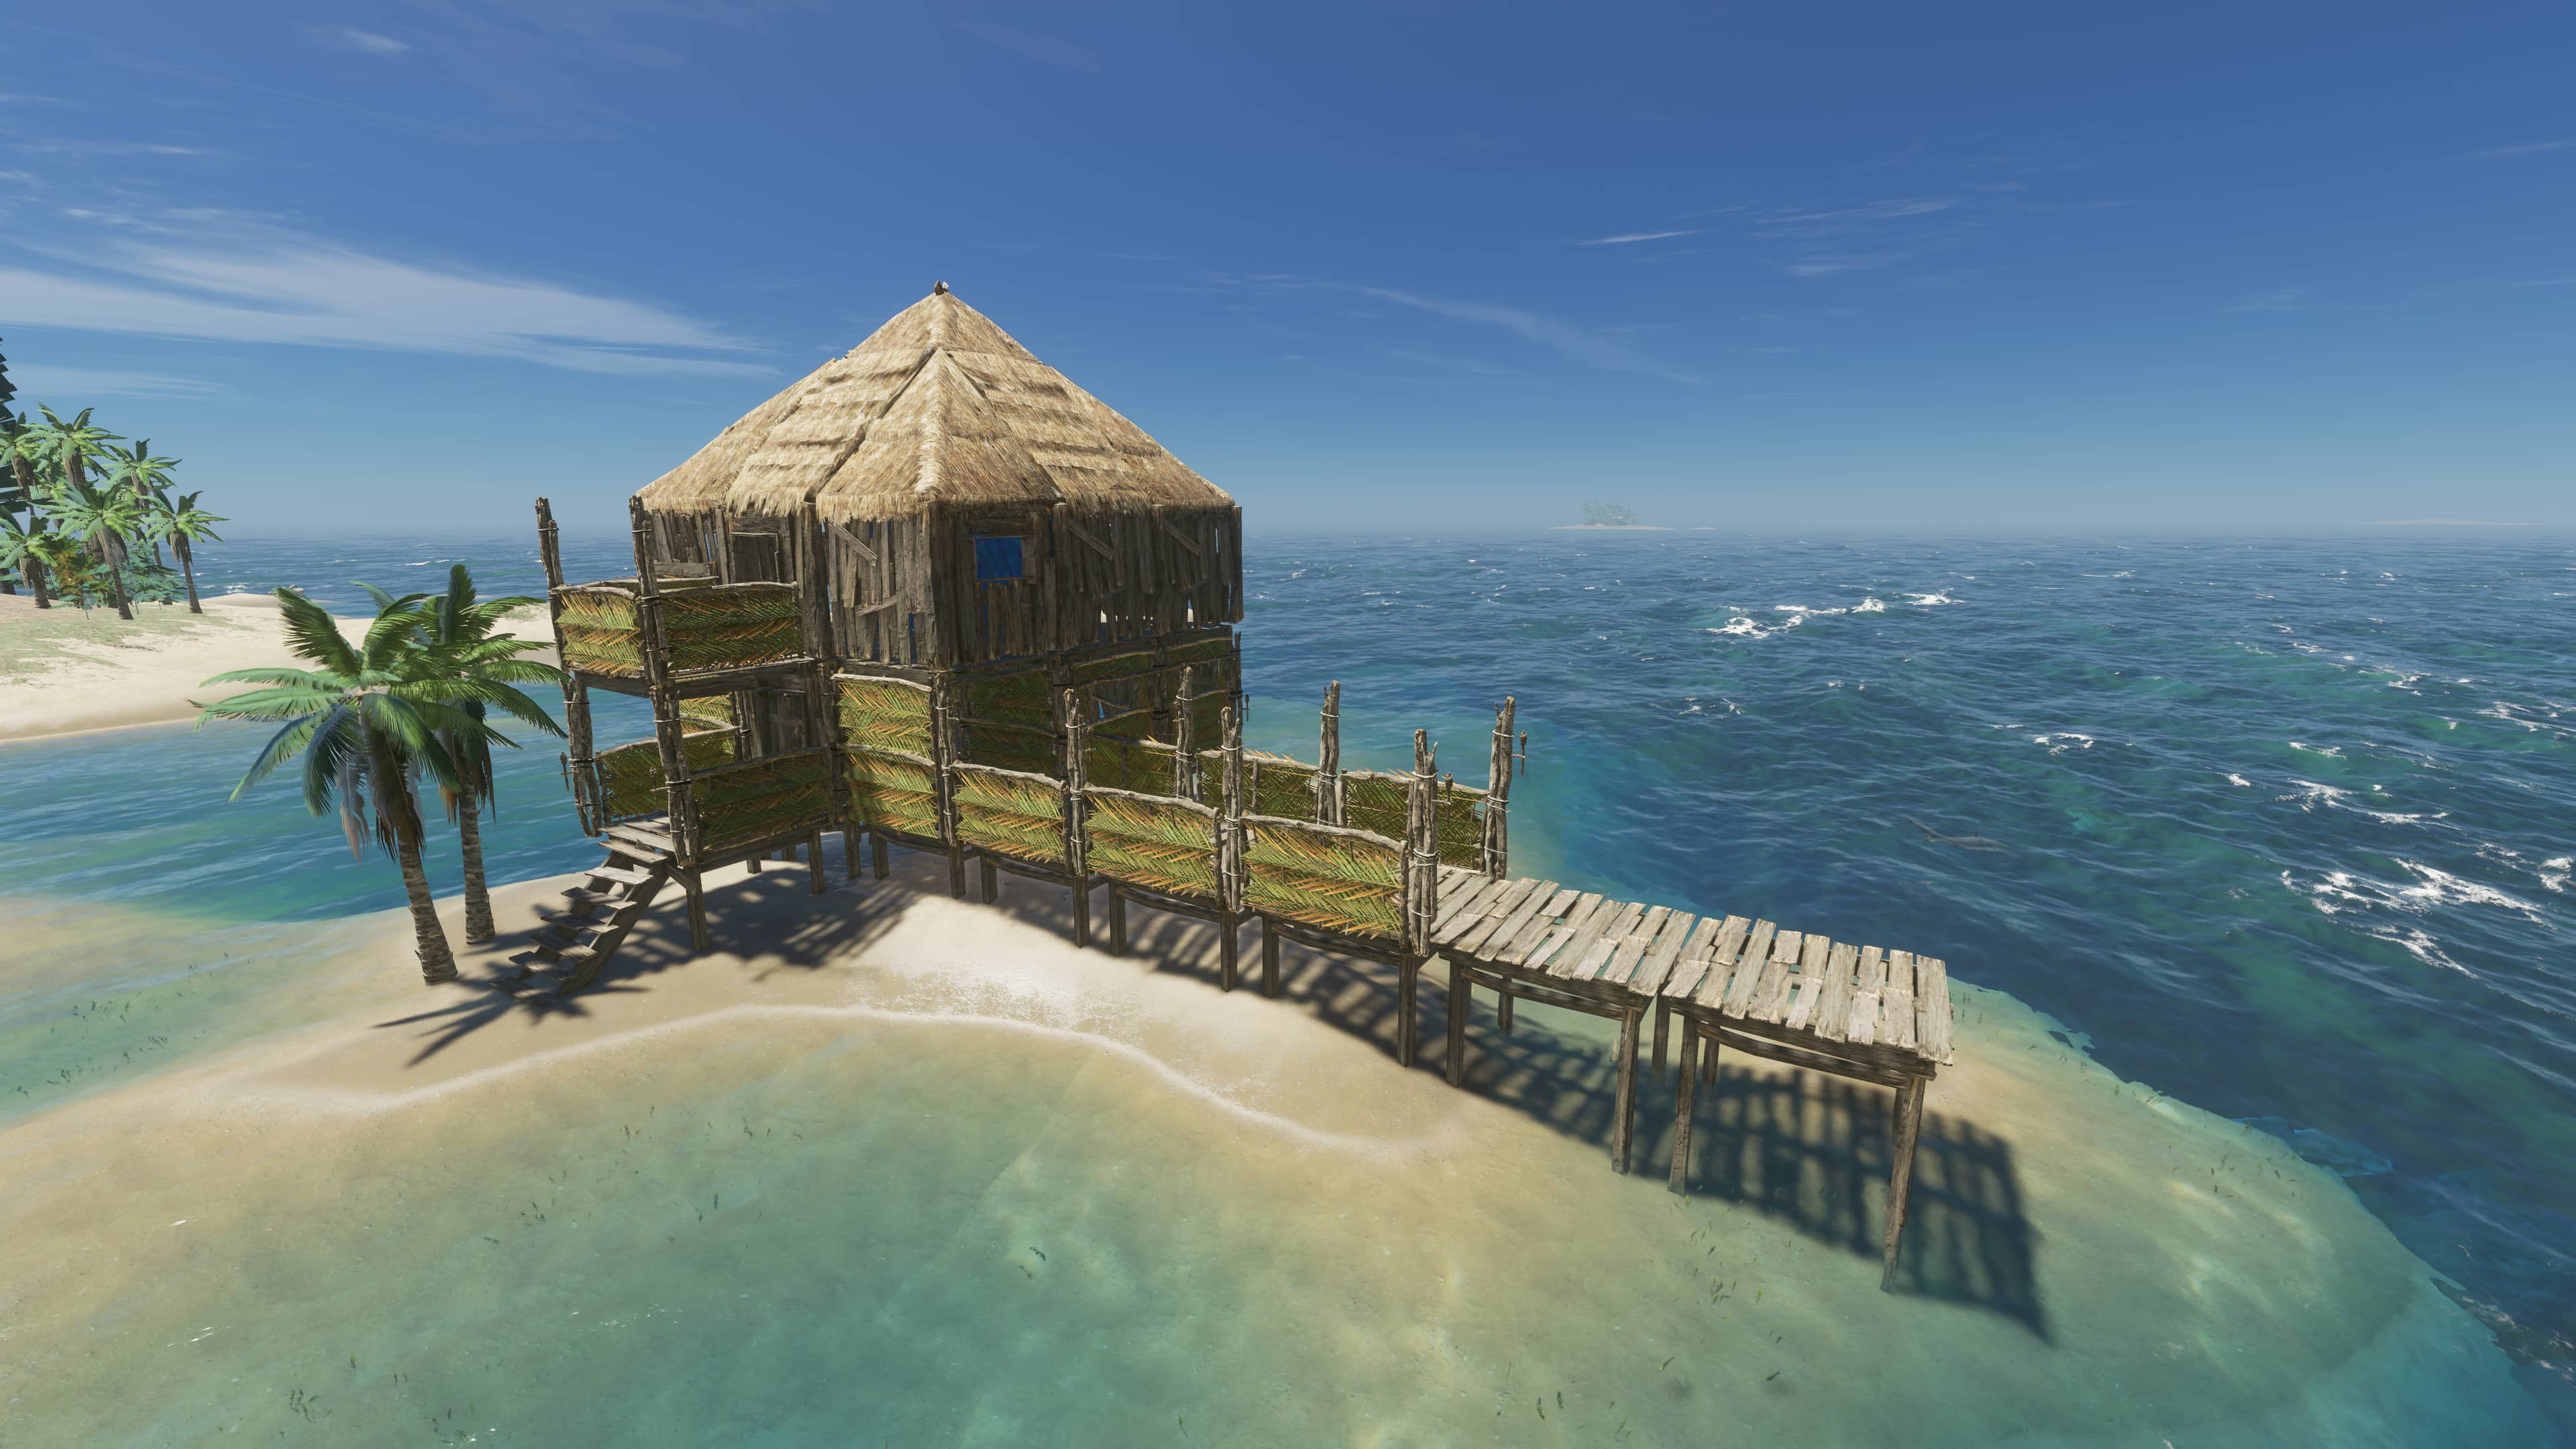 stranded deep ps4 game price